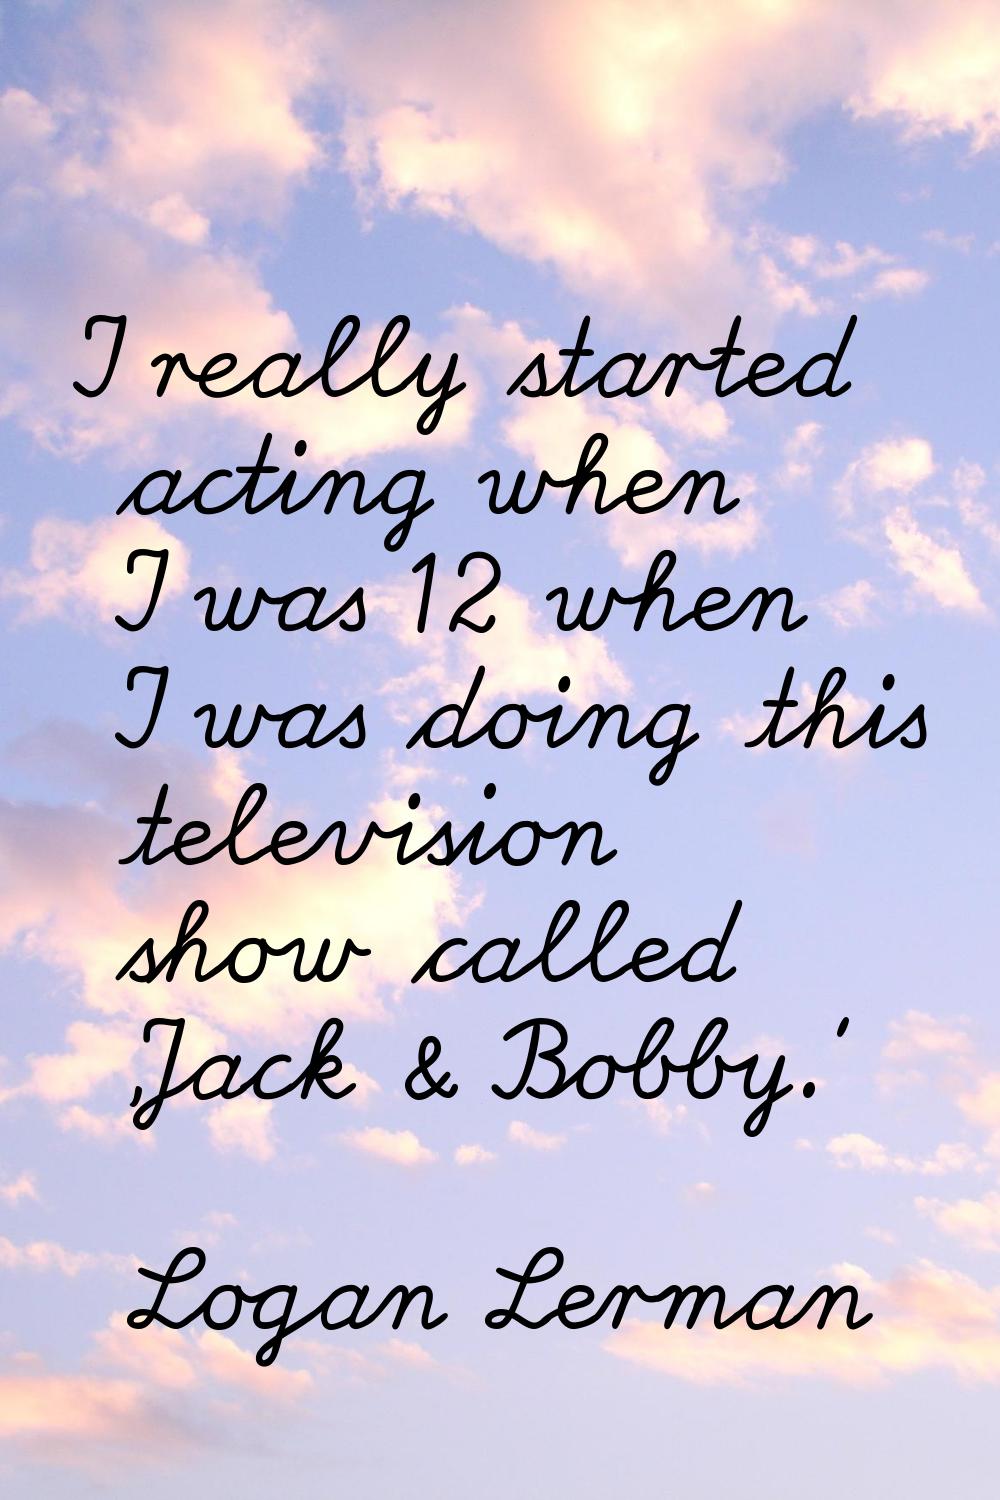 I really started acting when I was 12 when I was doing this television show called 'Jack & Bobby.'